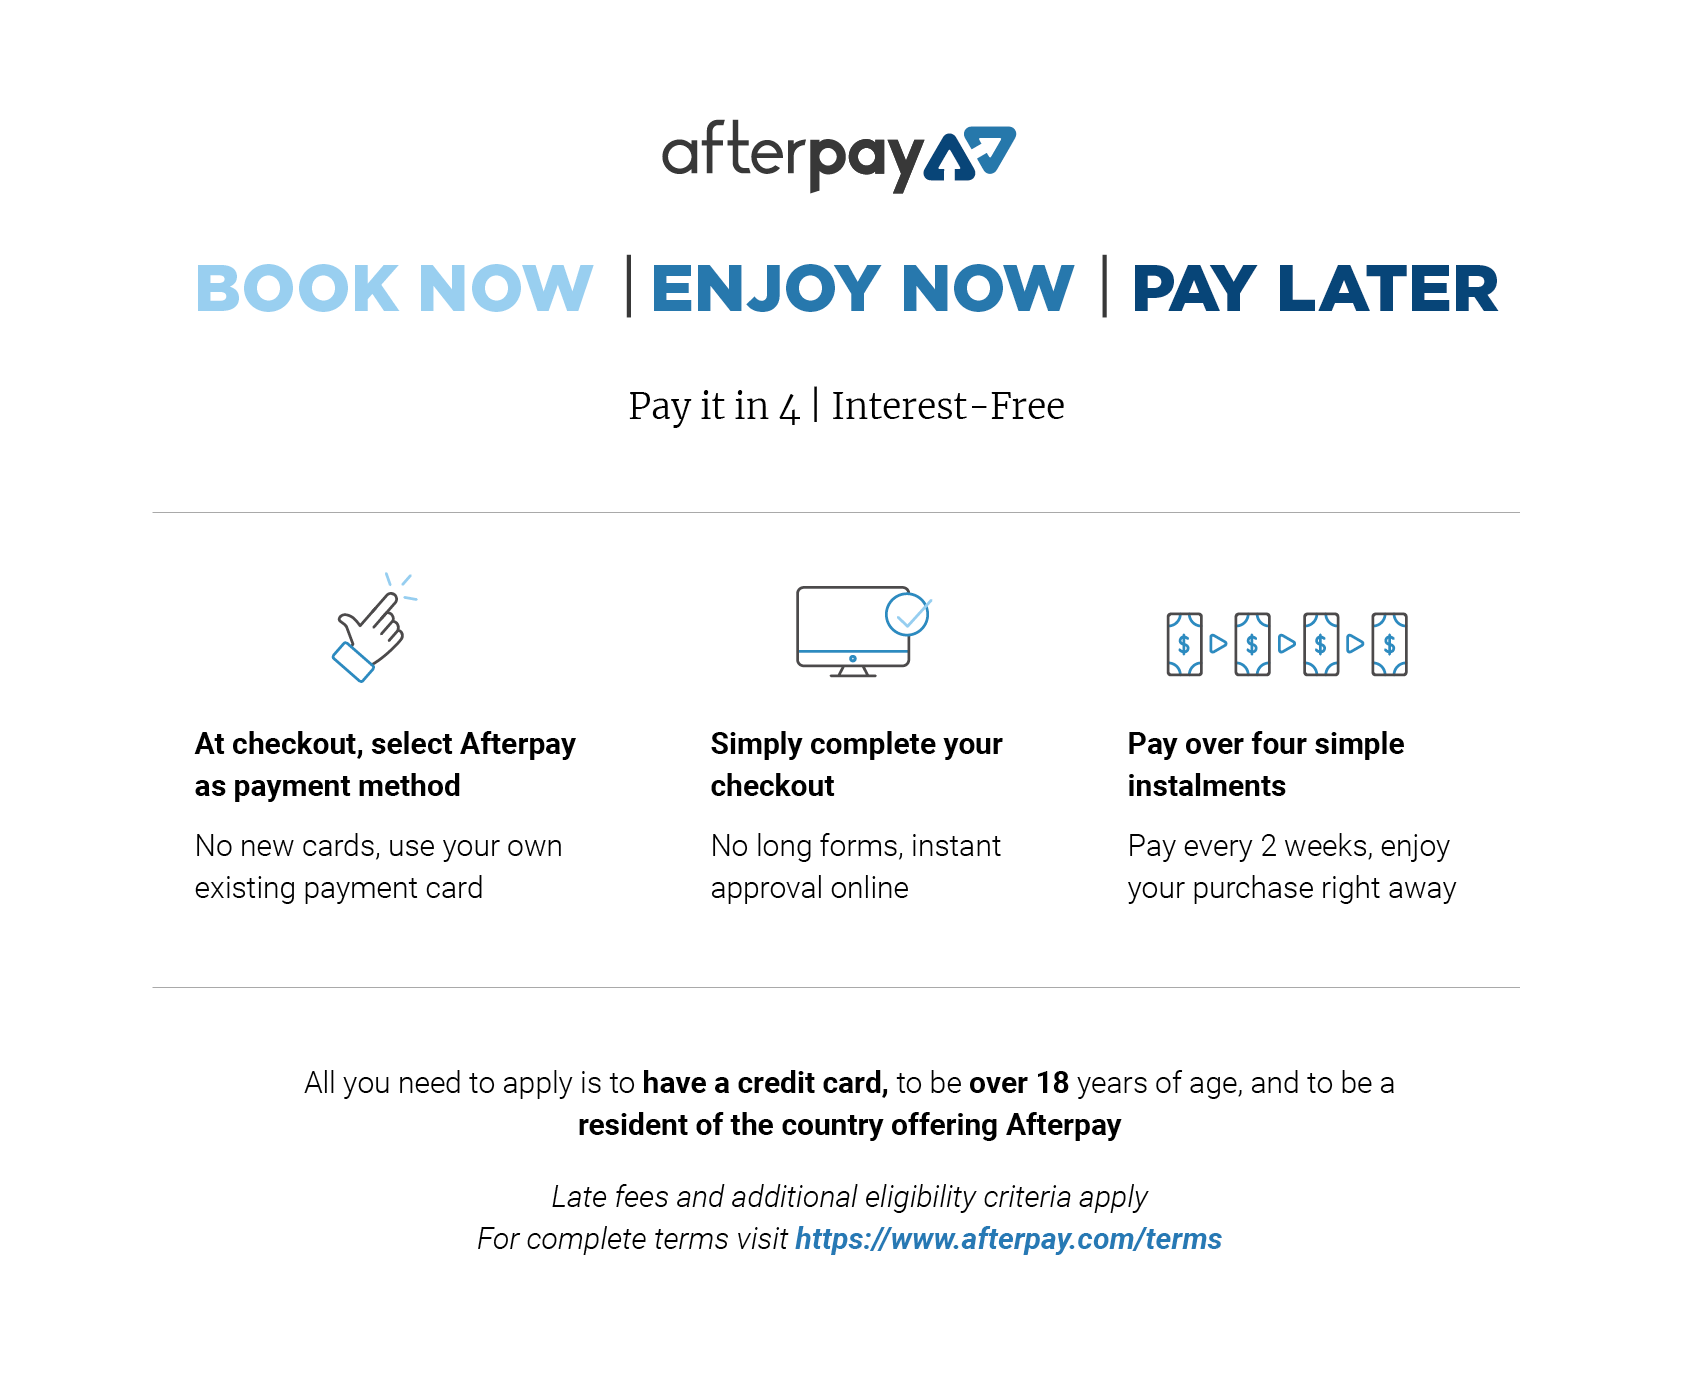 Afterpay information